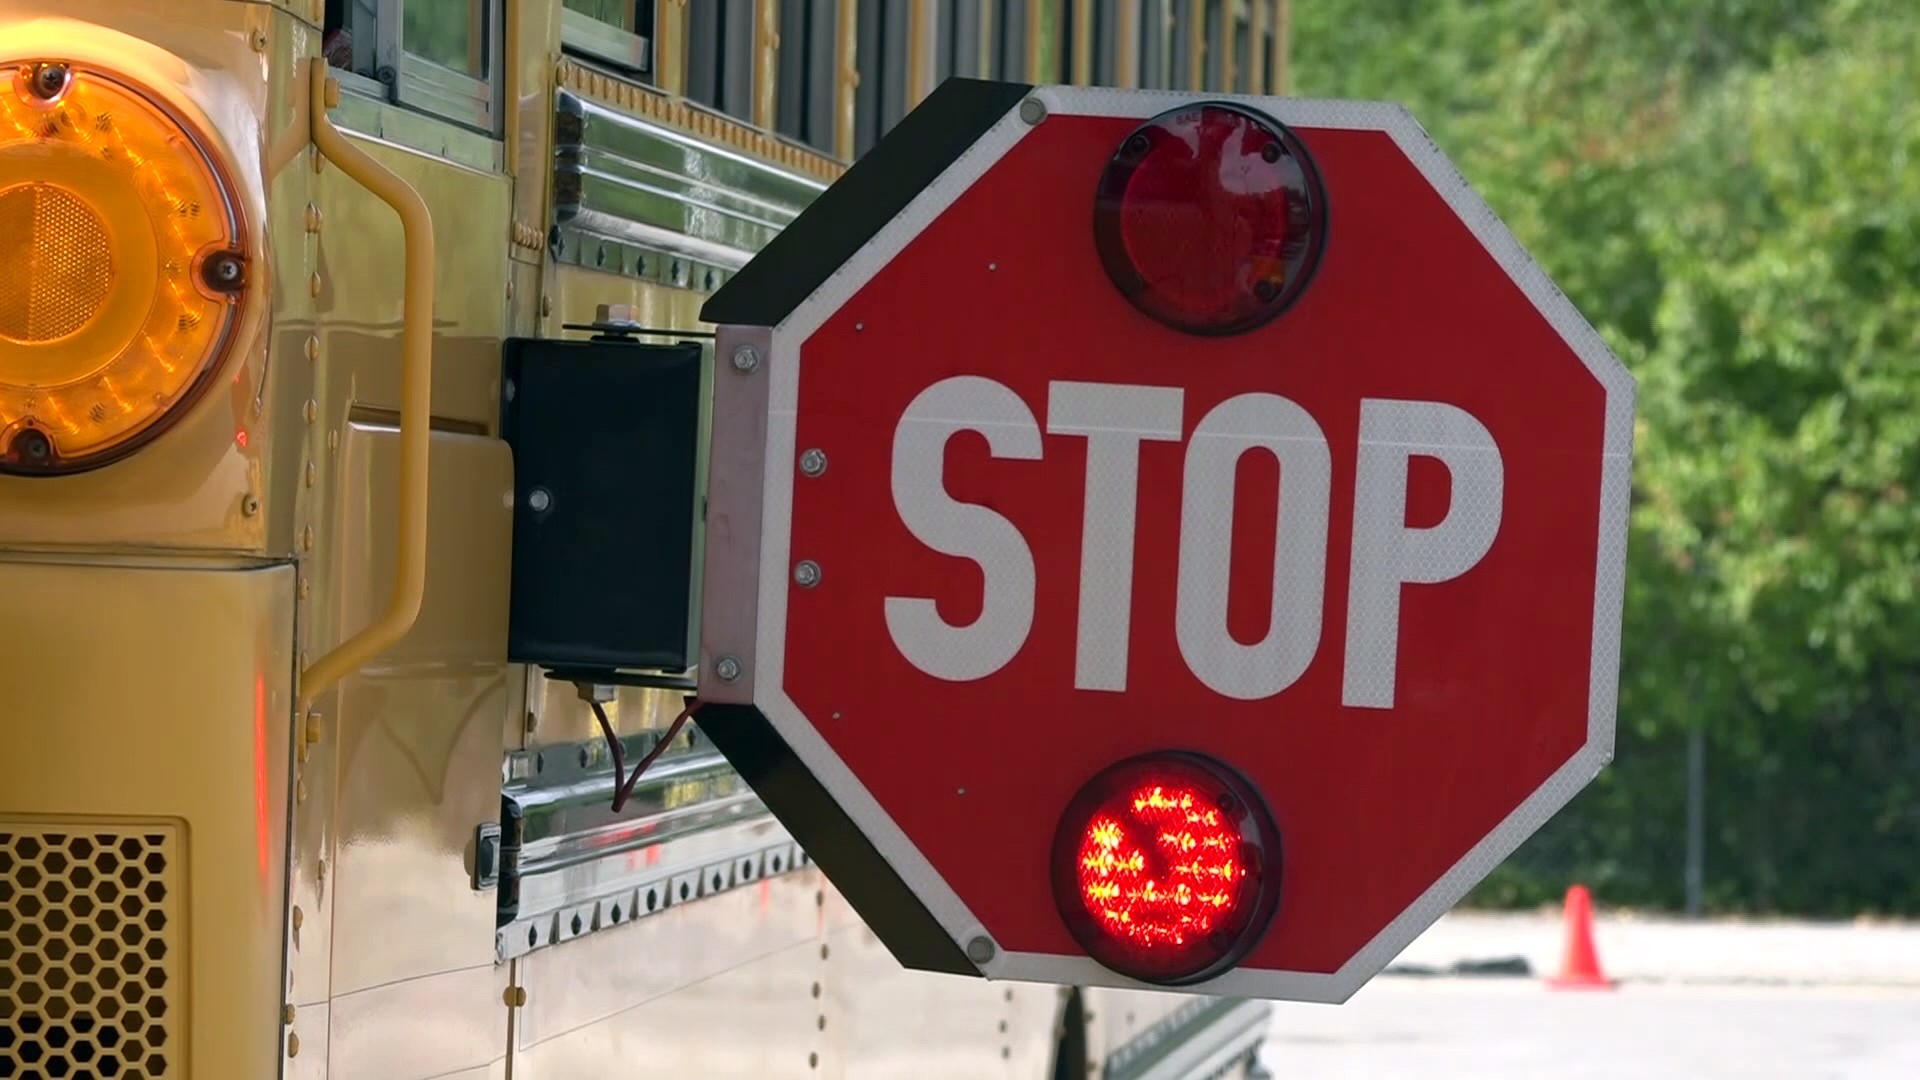 Police across the area are urging drivers to be more cautious around buses and school zones.